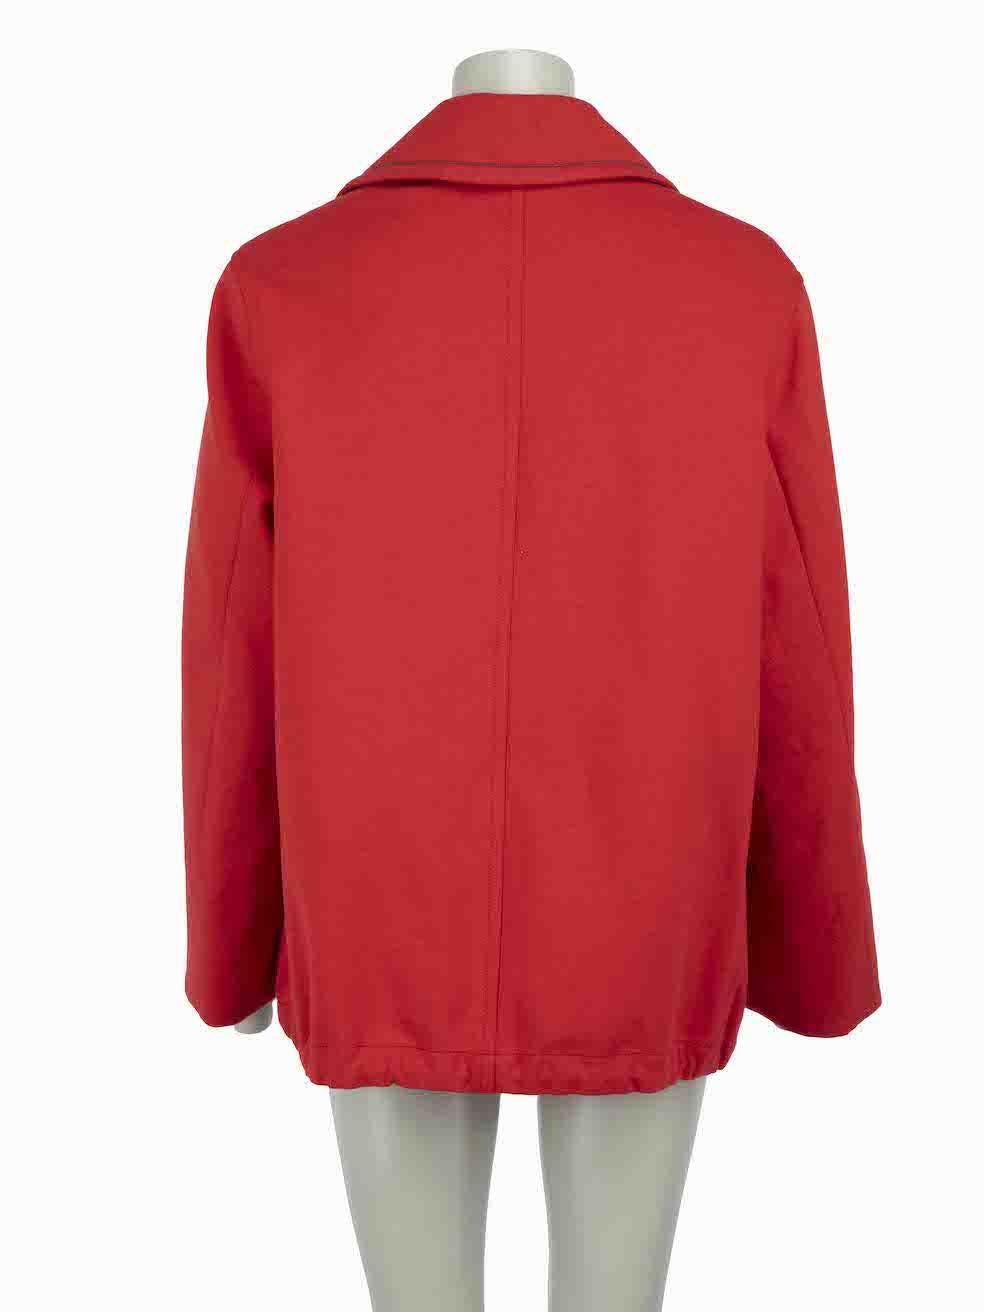 Brunello Cucinelli Red Bead Double Breasted Peacoat Size M In Excellent Condition For Sale In London, GB